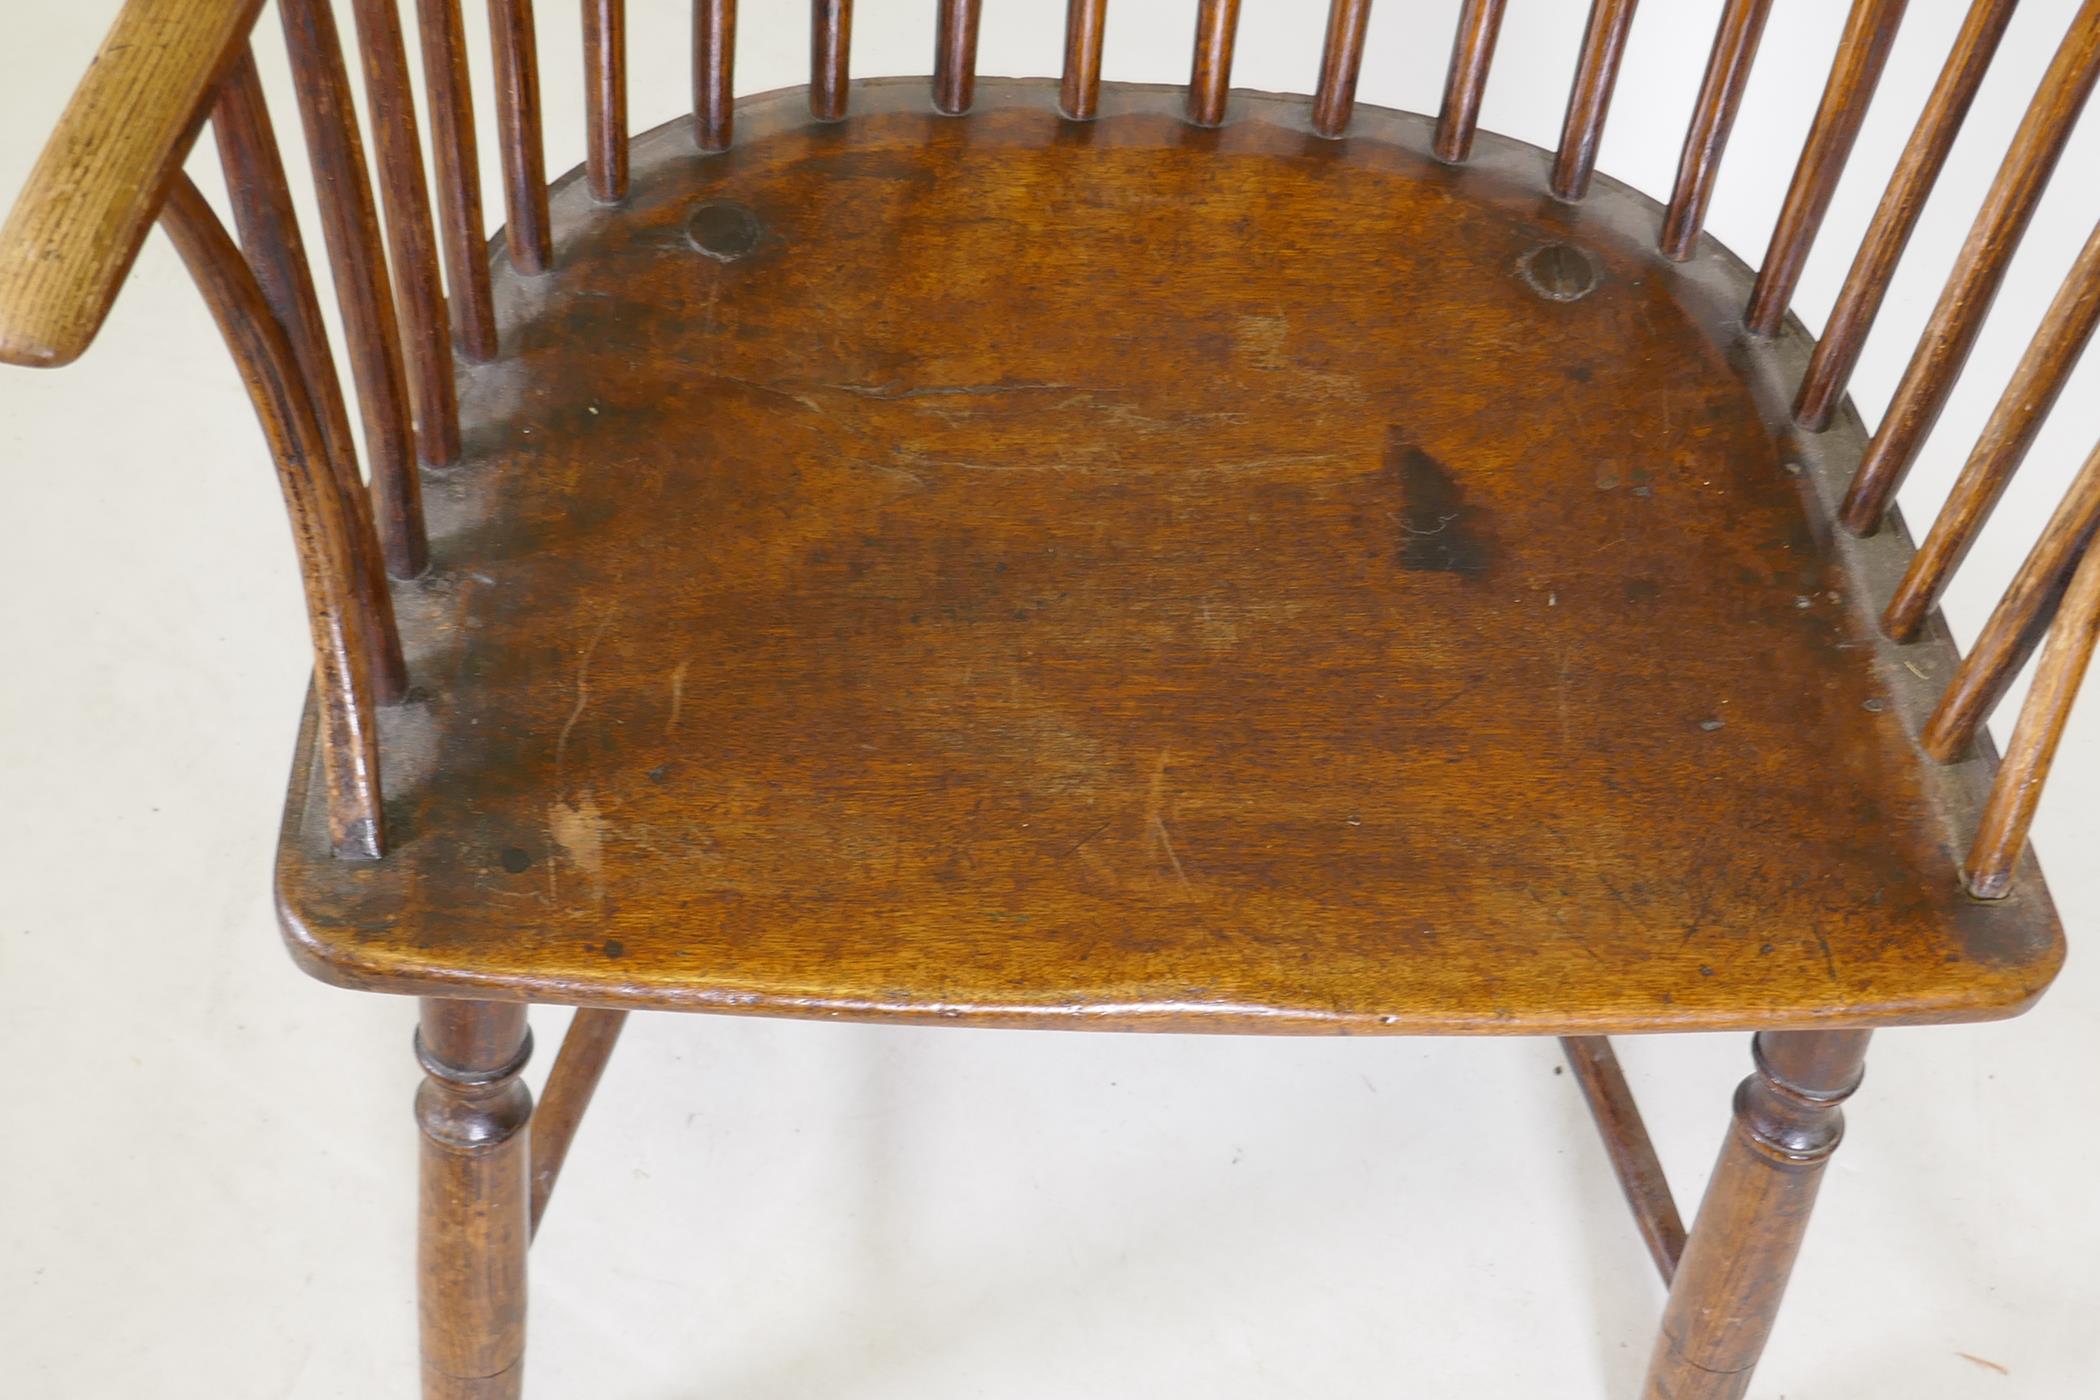 Early C19th Windsor comb back elbow chair with crinoline stretcher, raised on turned supports - Image 2 of 5